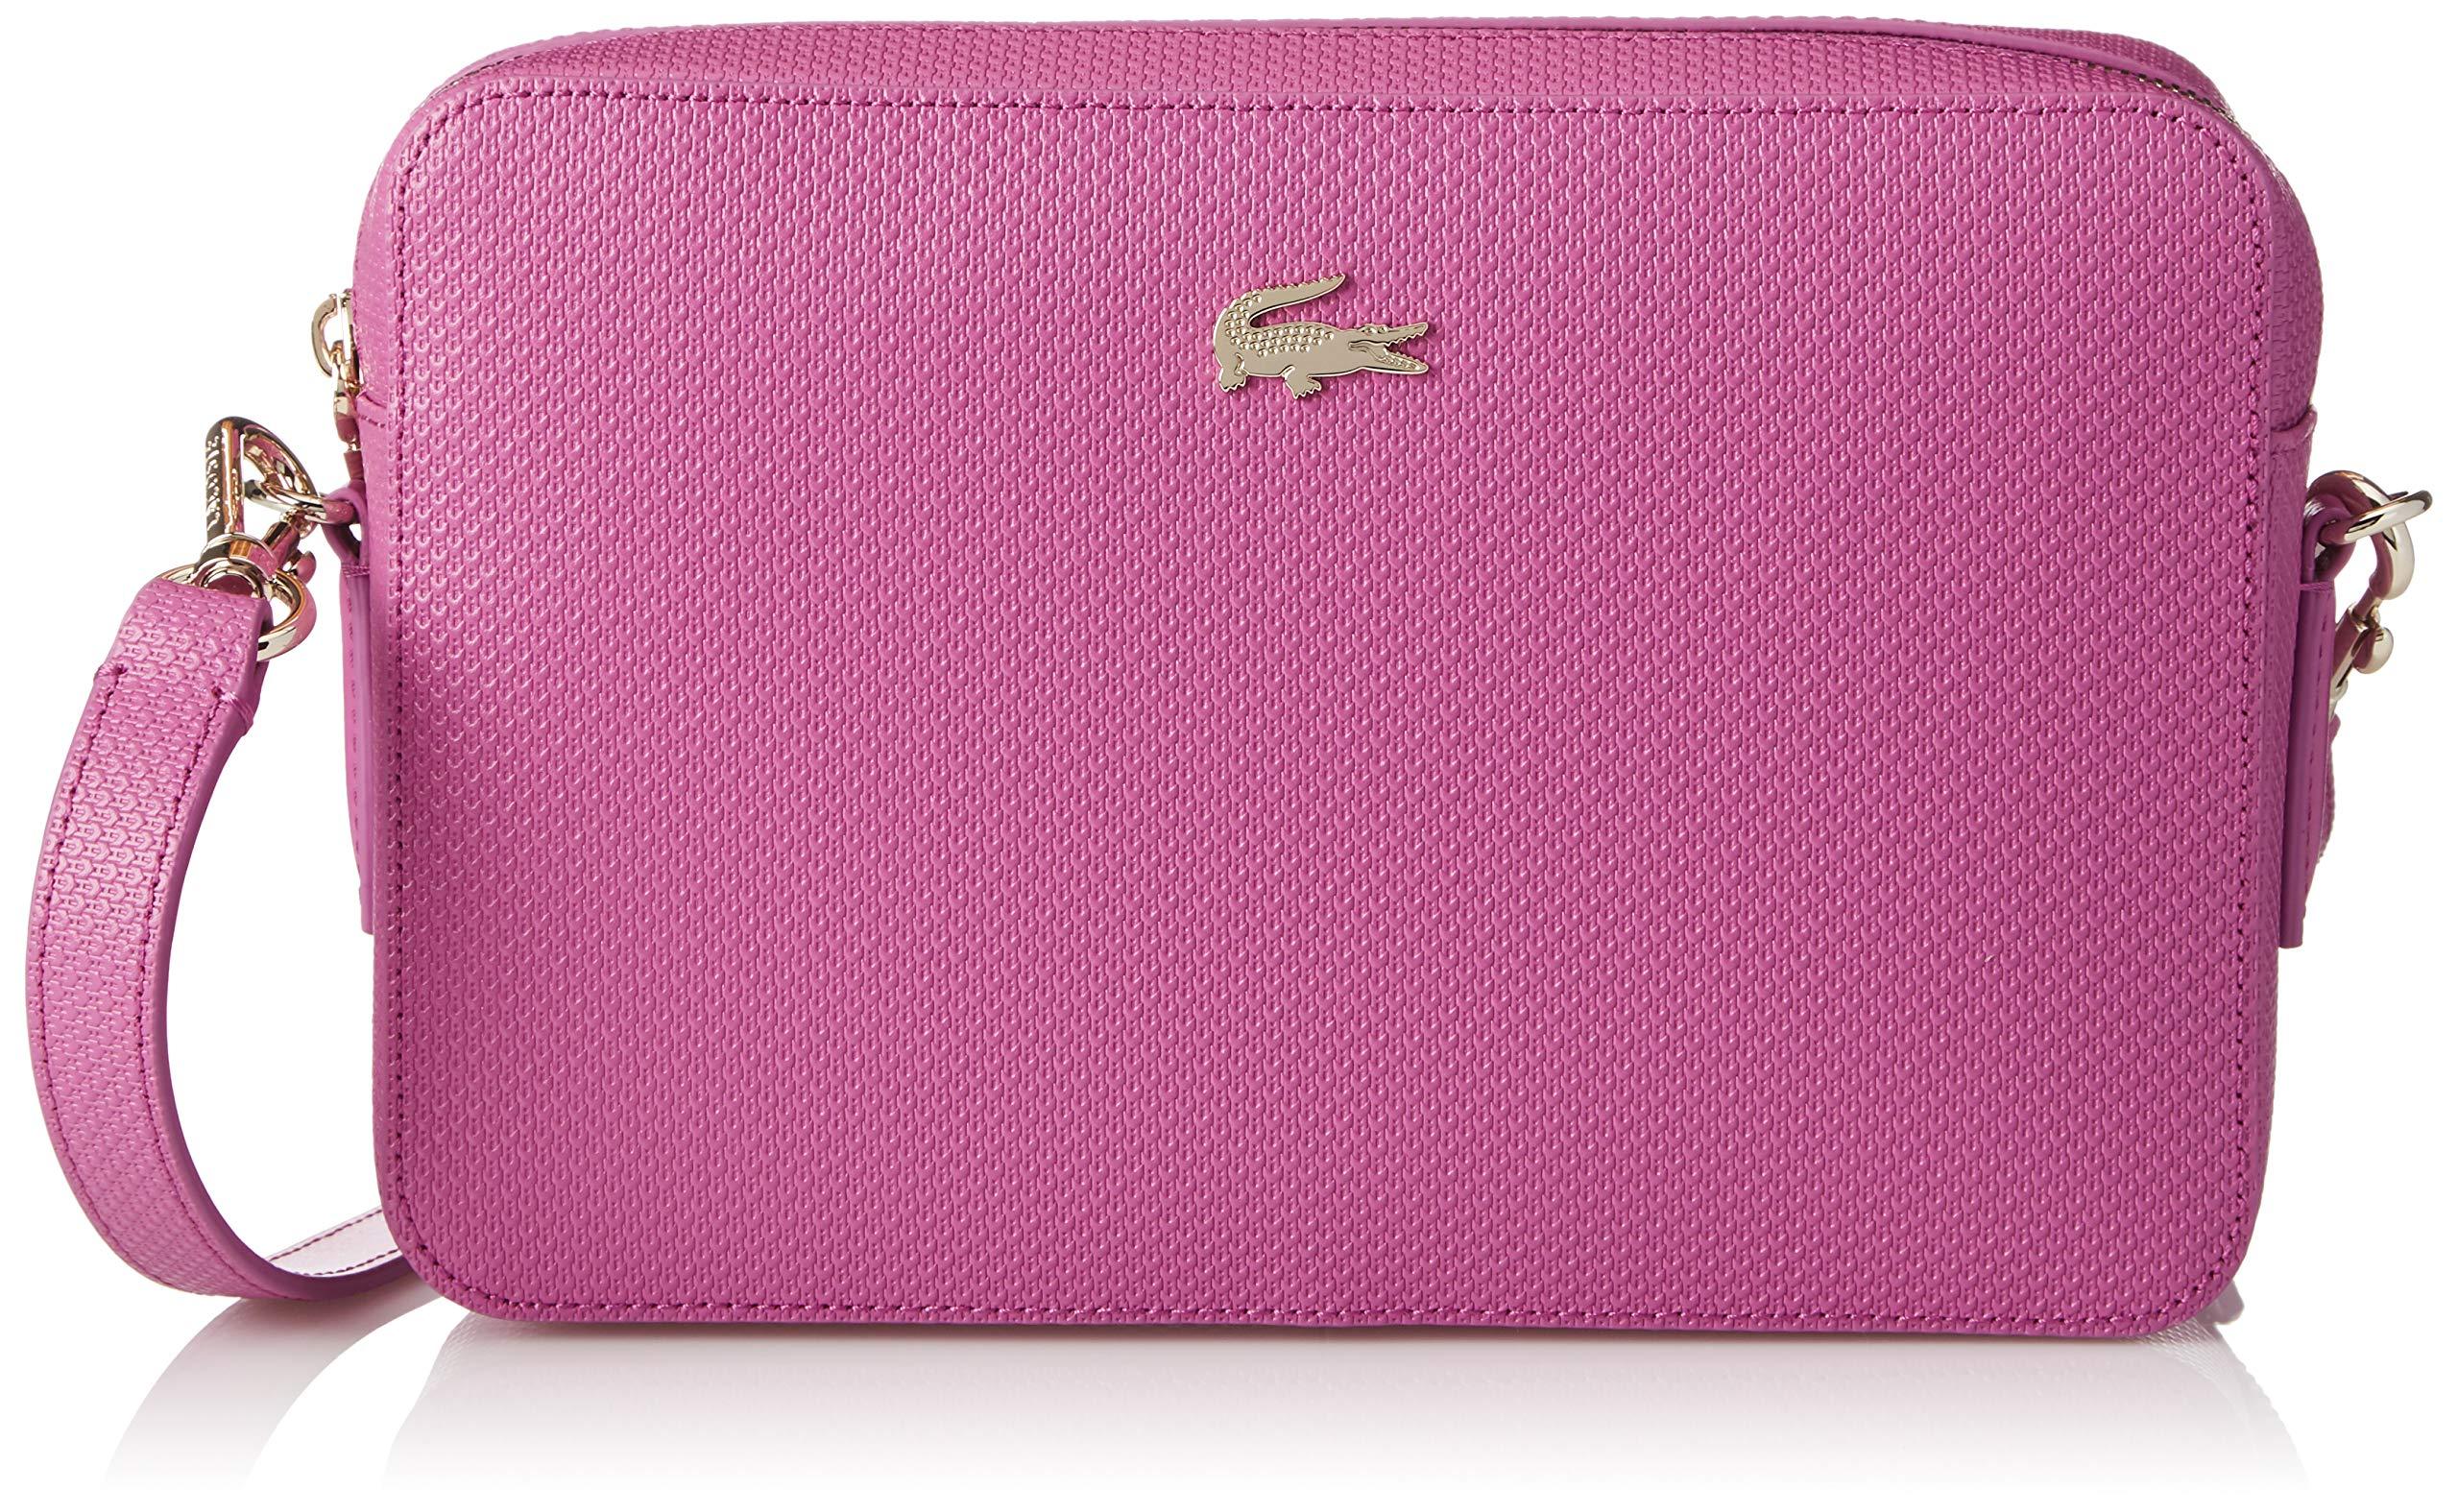 lacoste pink bag